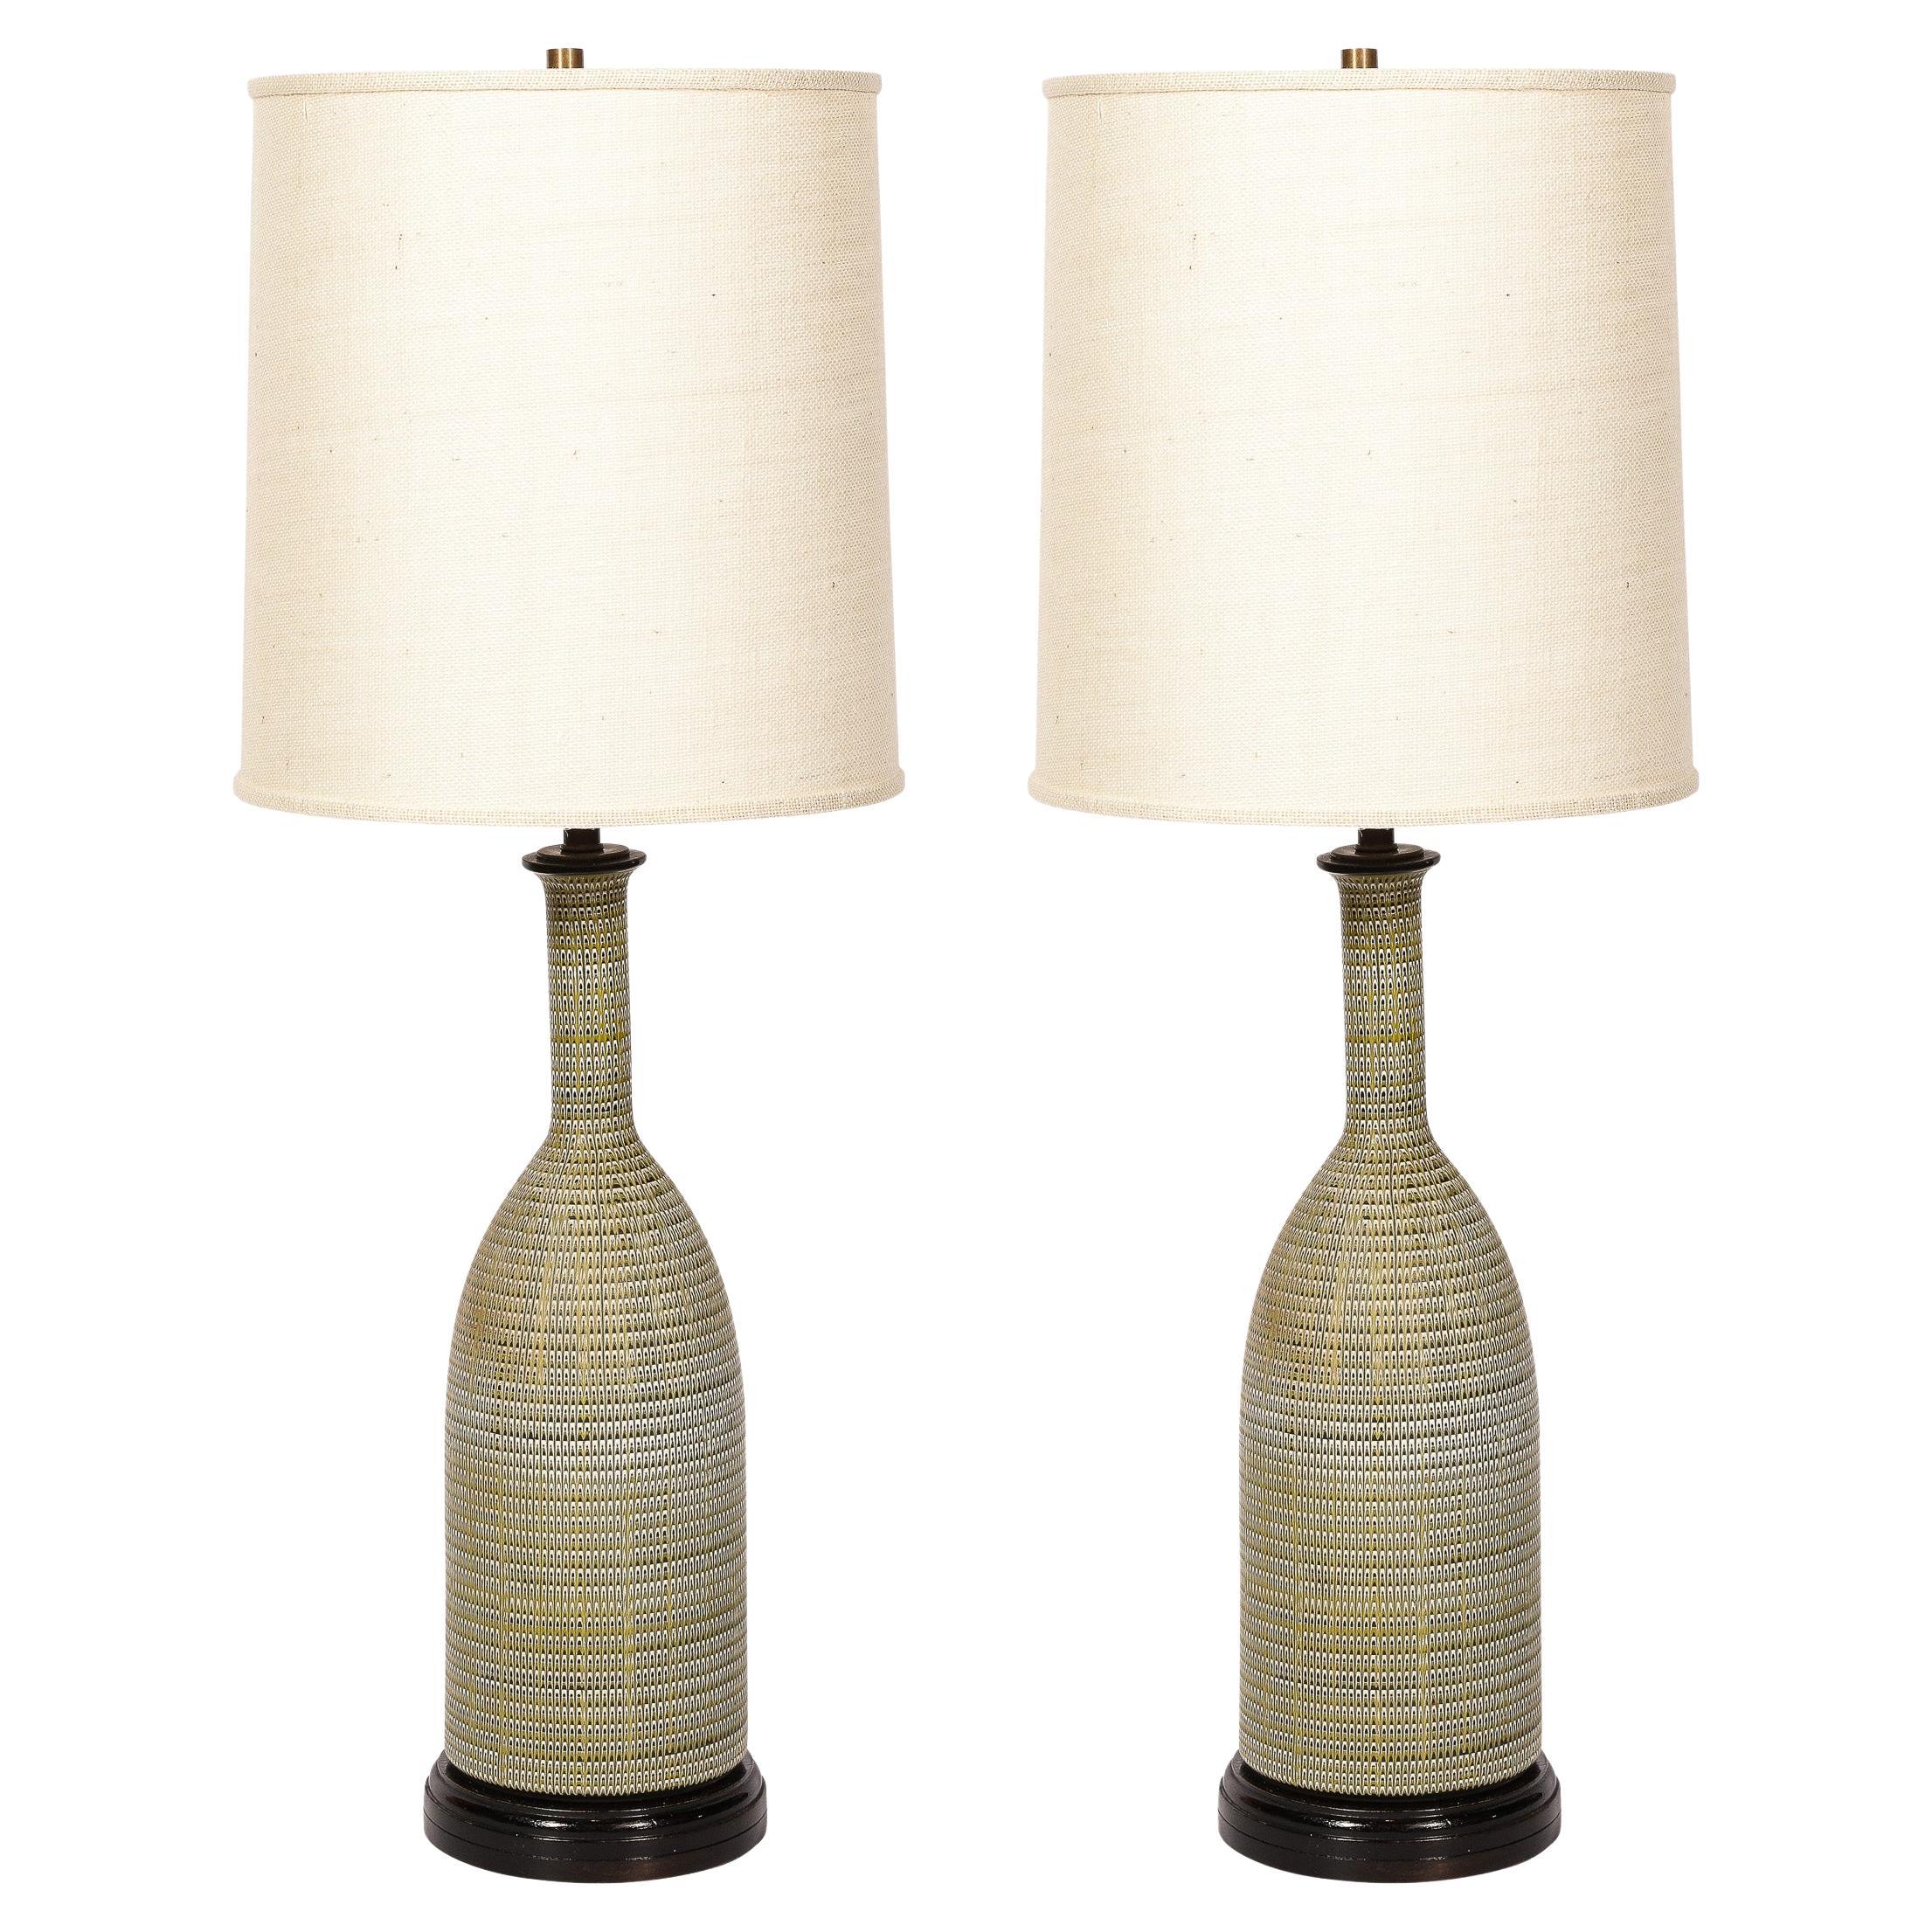 Pair of Mid-Century Modern Olive Green Glazed Ceramic Table Lamps